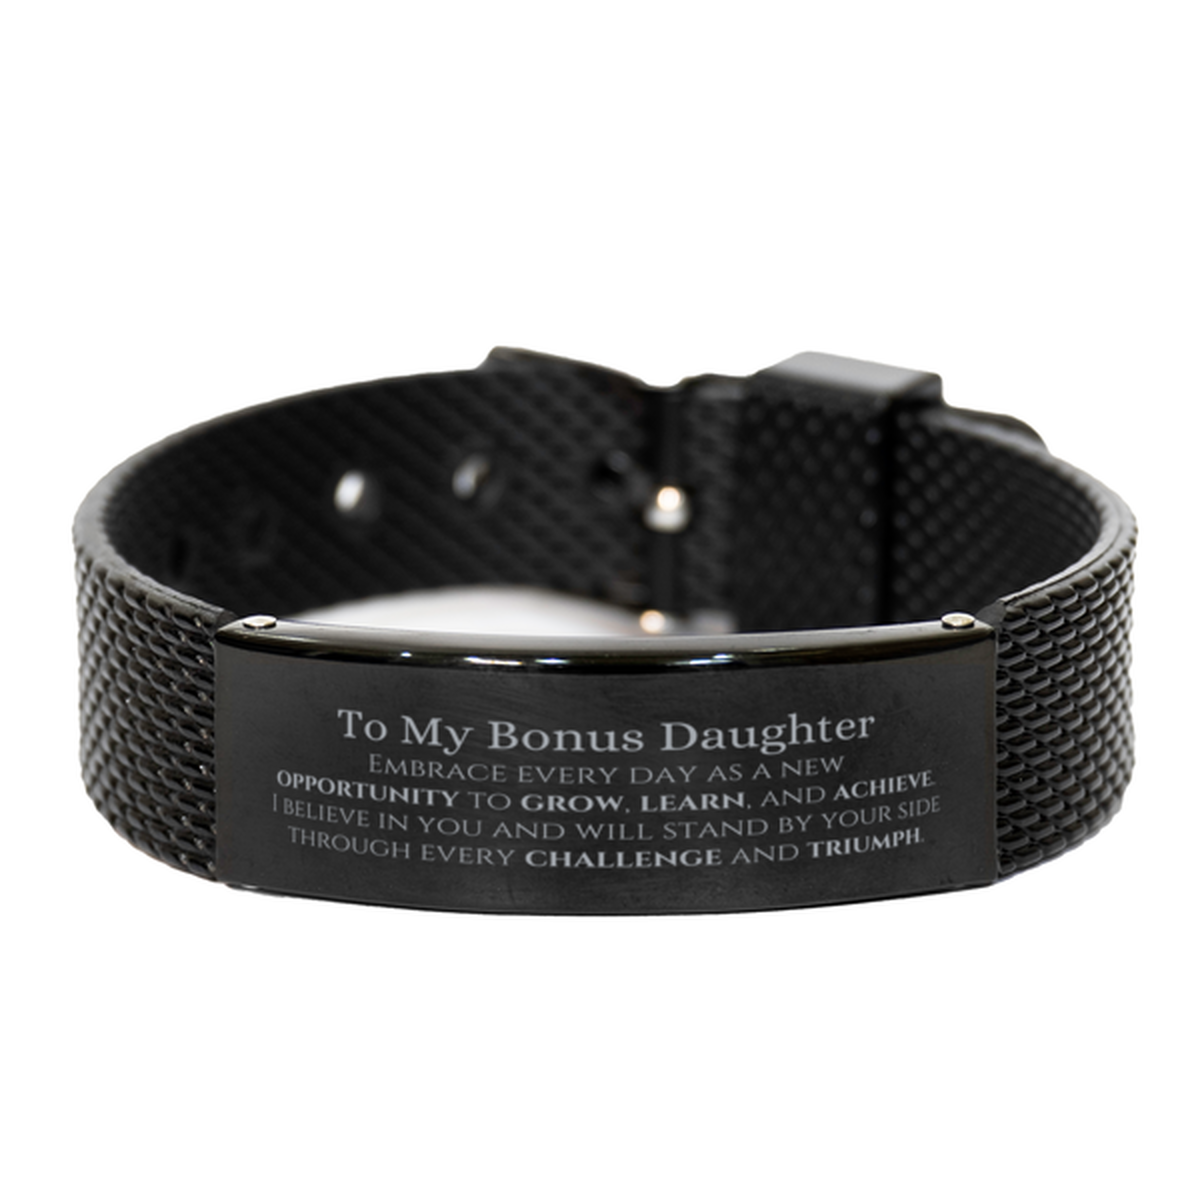 To My Bonus Daughter Gifts, I believe in you and will stand by your side, Inspirational Black Shark Mesh Bracelet For Bonus Daughter, Birthday Christmas Motivational Bonus Daughter Gifts